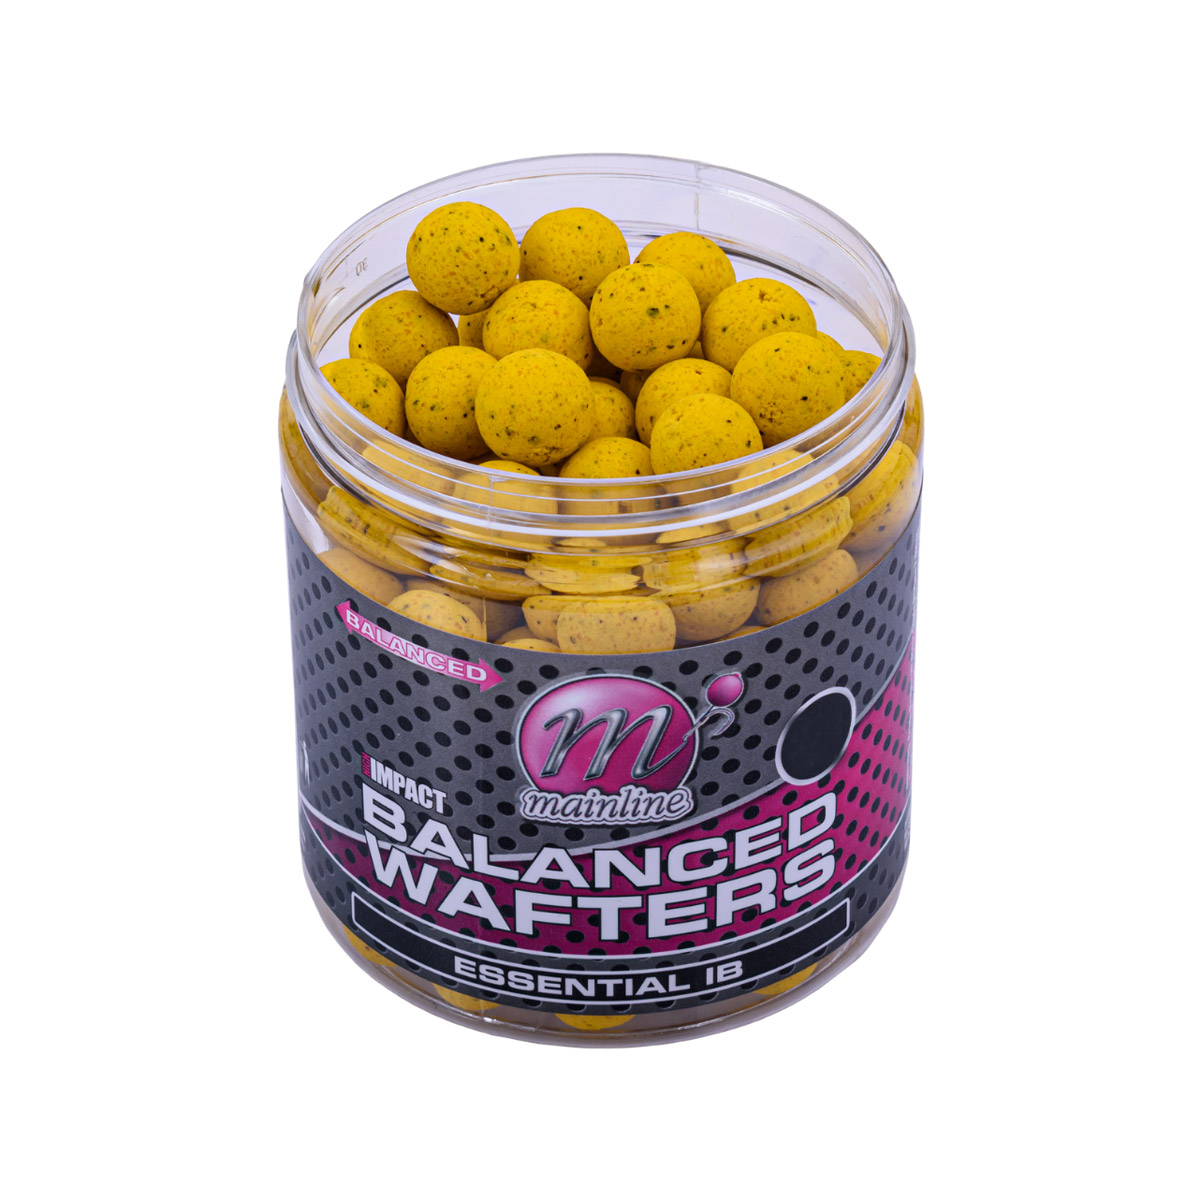 Mainline High Impact Balanced Wafters Essential IB 